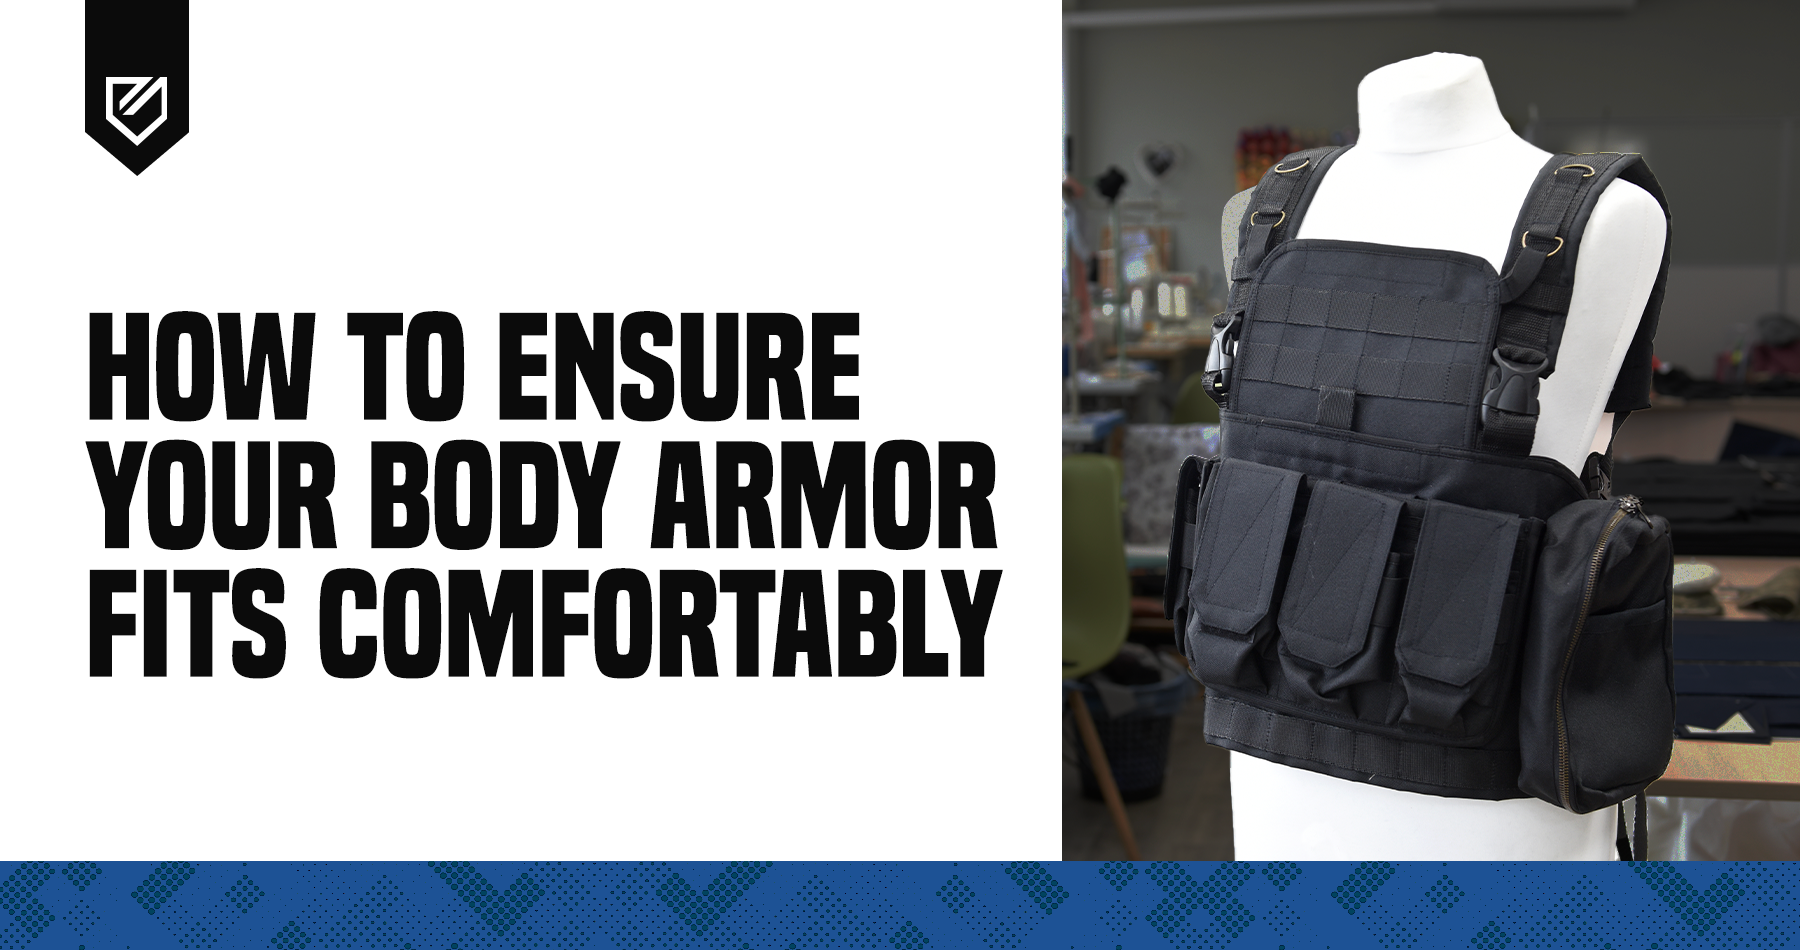 How to Ensure your Body Armor Fits Comfortably